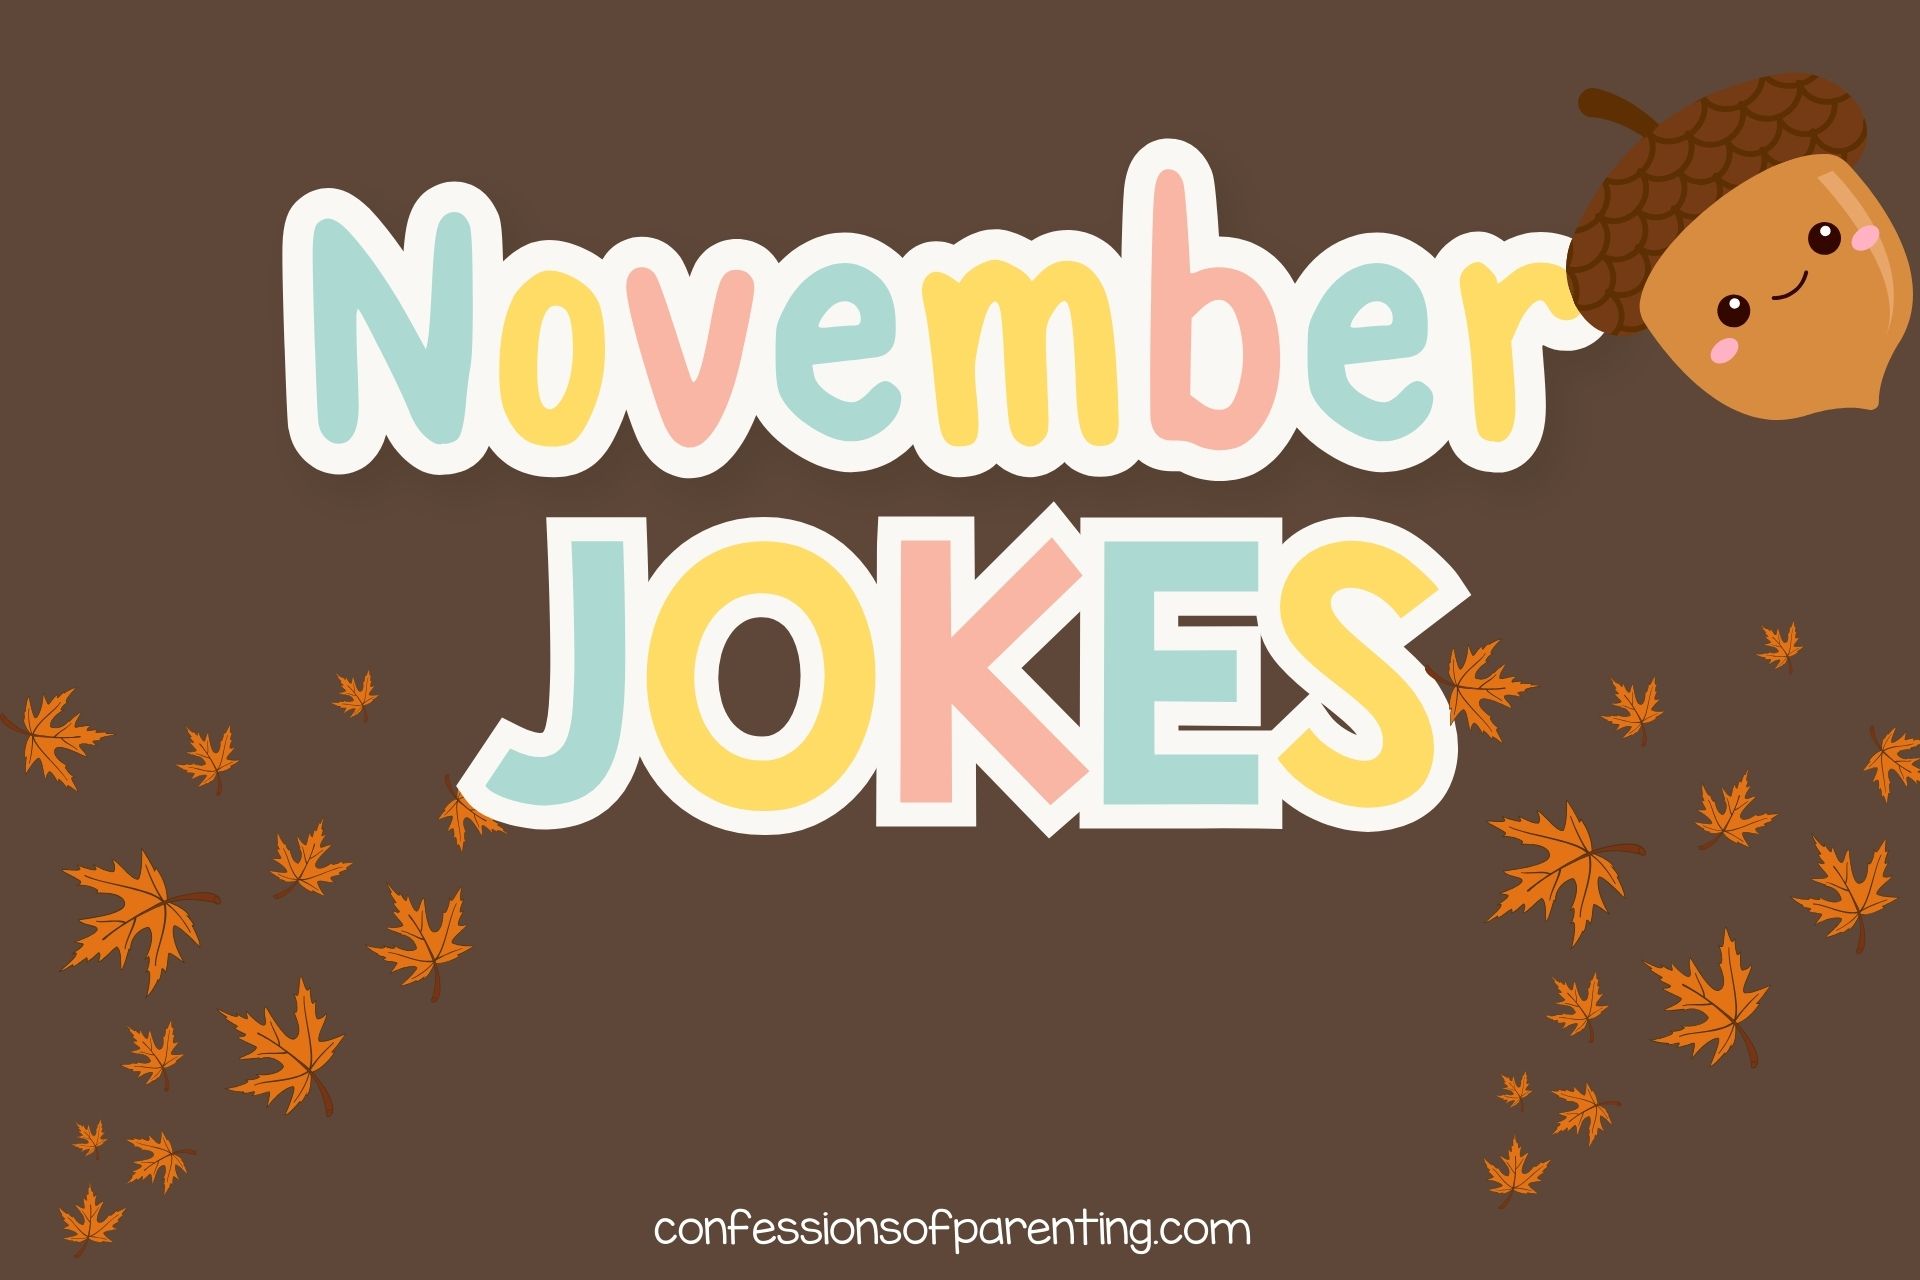 featured image in brown background in colorful text saying "November jokes" with a acorn on the side and leaves